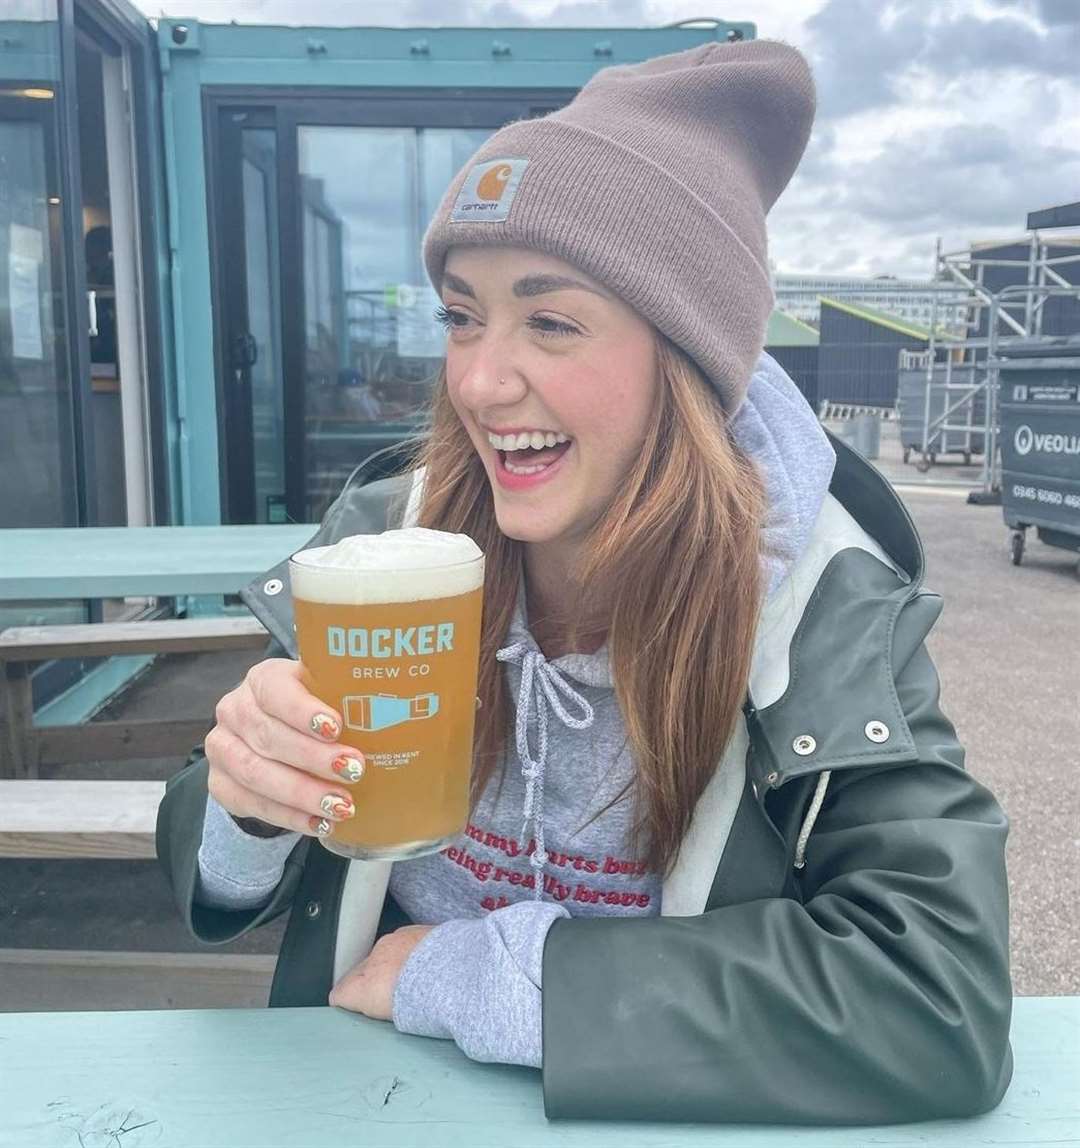 Rosie Percy nursed many pints at the Docker Bakery on Folkestone Harbour Arm before it closed last year. Pic: Instagram/@coolasfolke